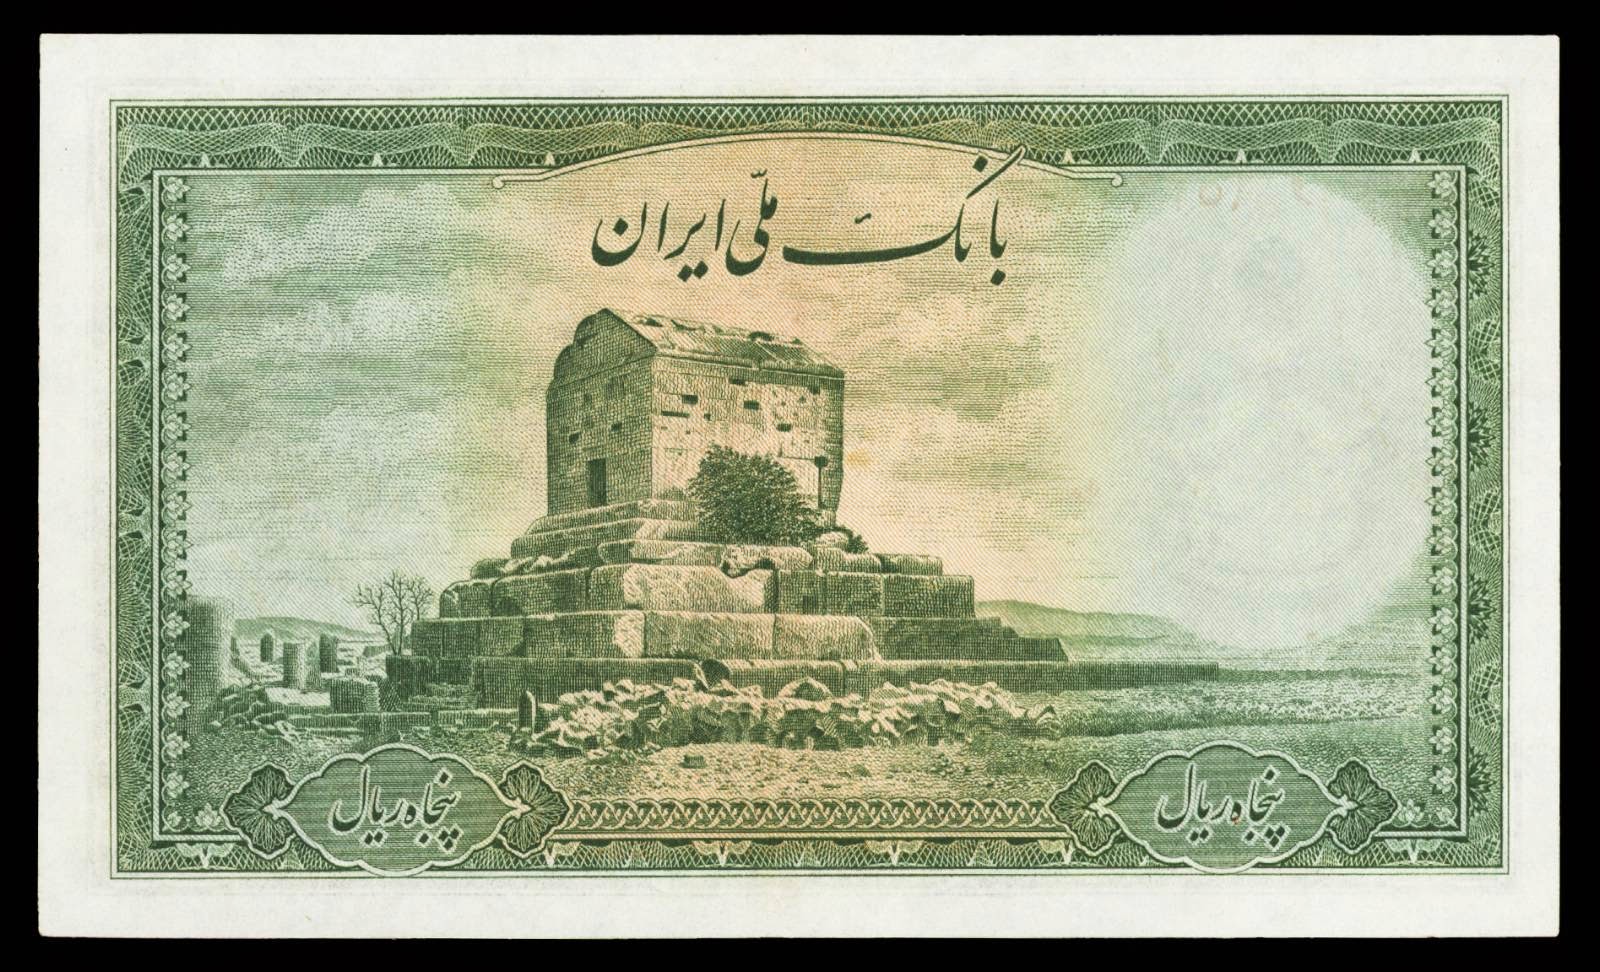 Iran money 50 Rials banknote 1944 Mausoleum of Cyrus the Great of Persia in Pasargad